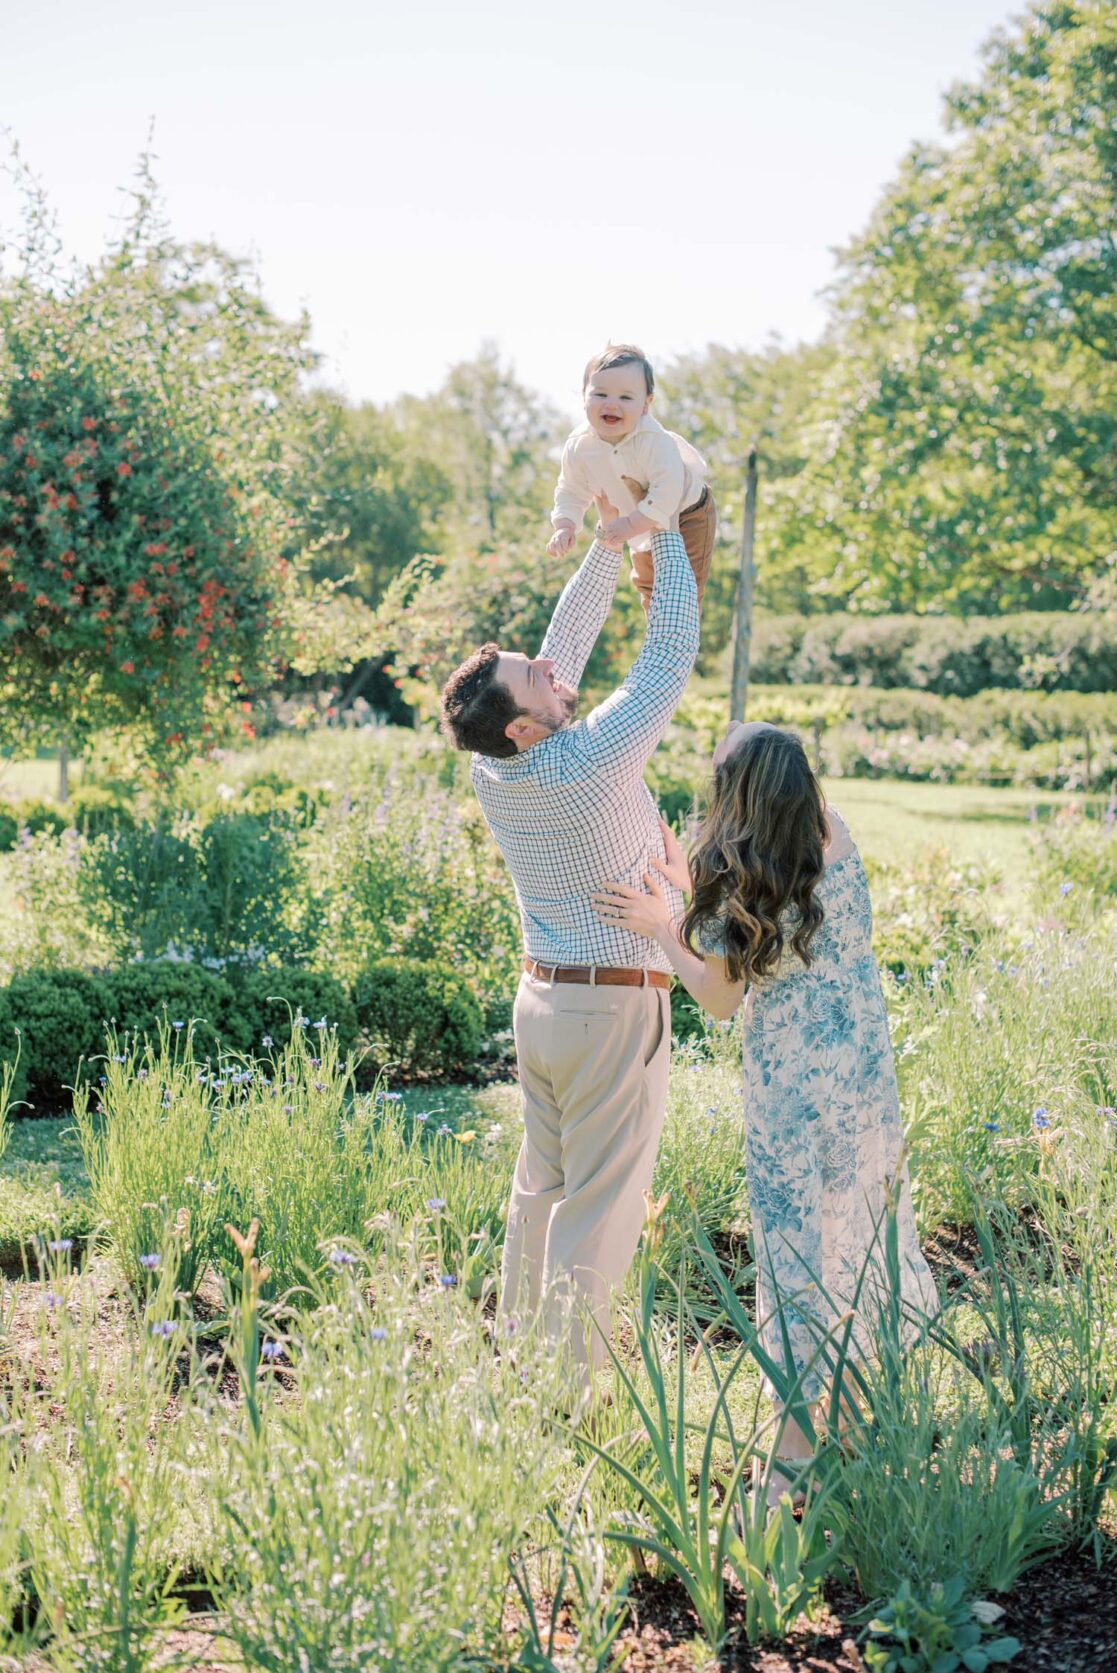 Photo of dad holding baby son up in the air in a garden while mom looks on and smiles Richmond baby photographer Jacqueline Aimee Portraits